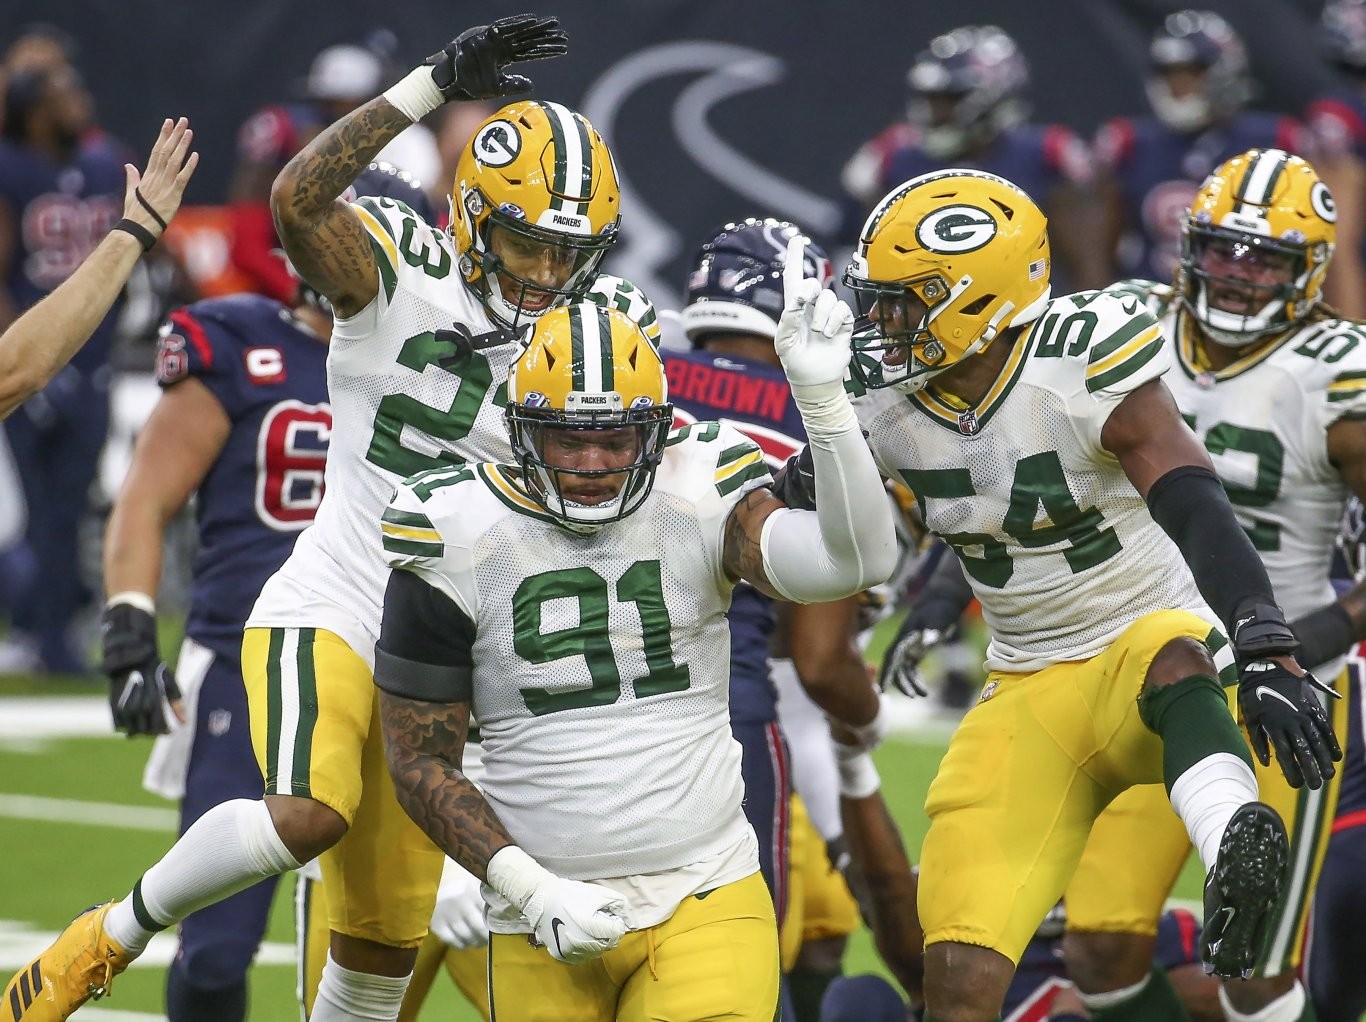 Five Packers Who Will Have a Better Second Half of the Season